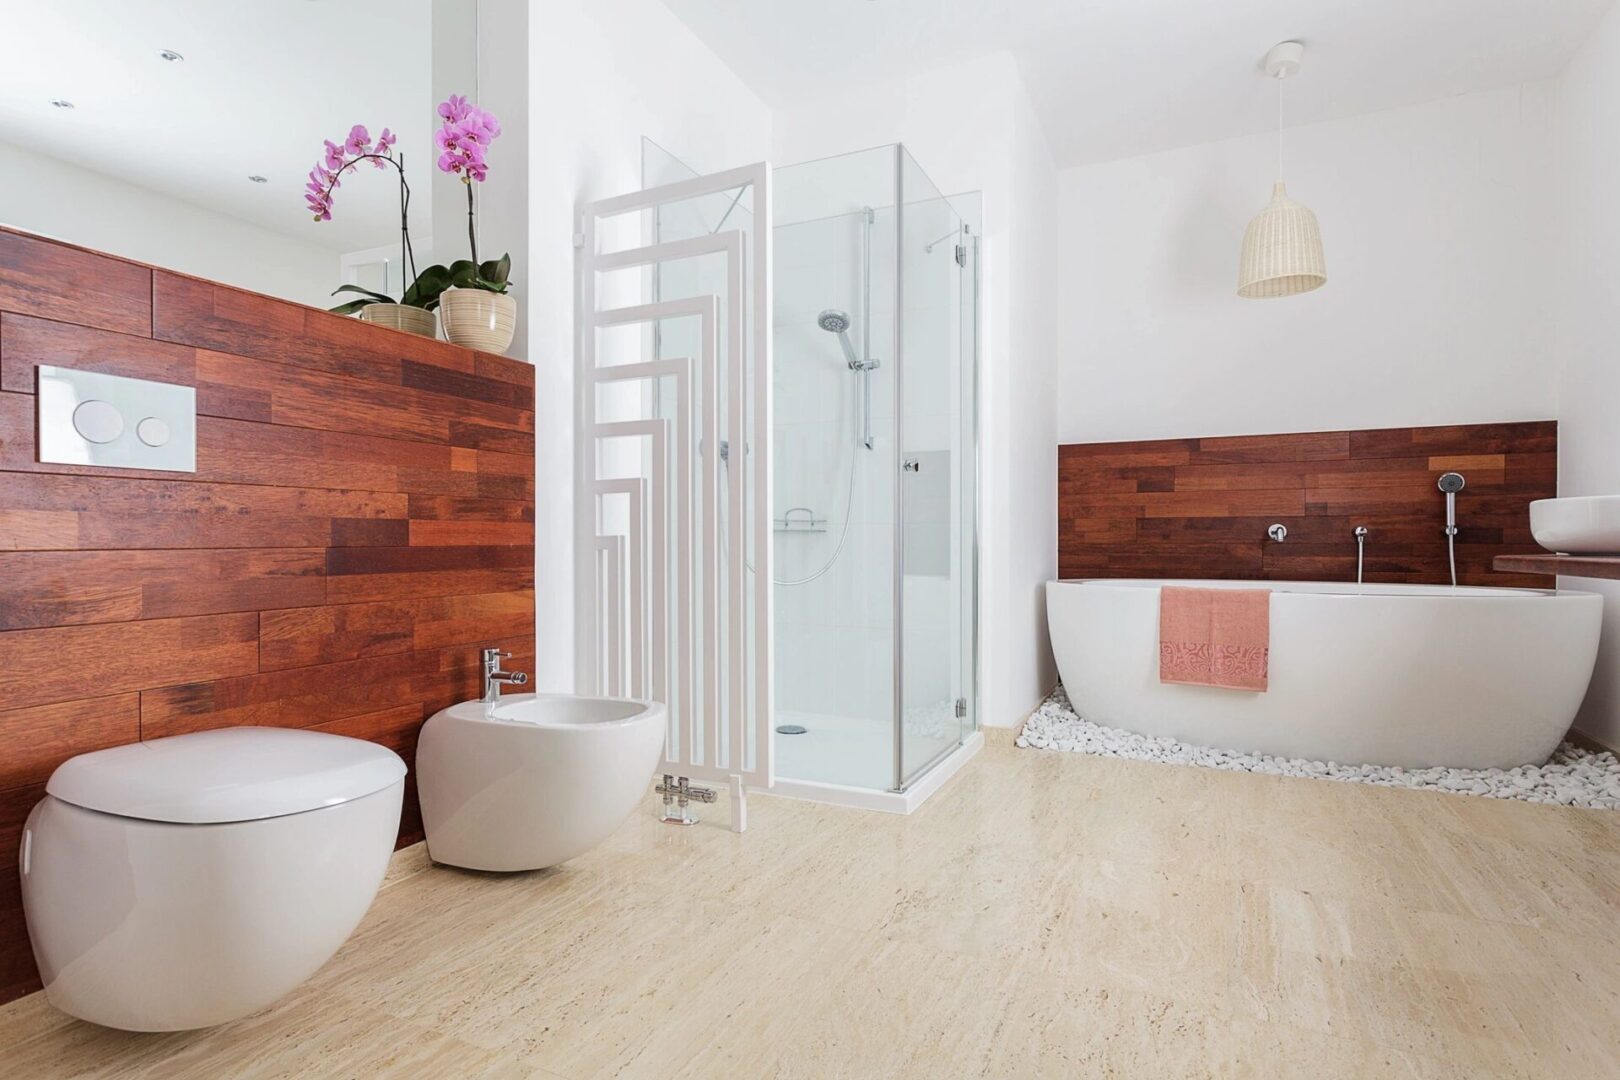 About London Kitchen and Bath - A white and wood bathroom with a tub and toilet.